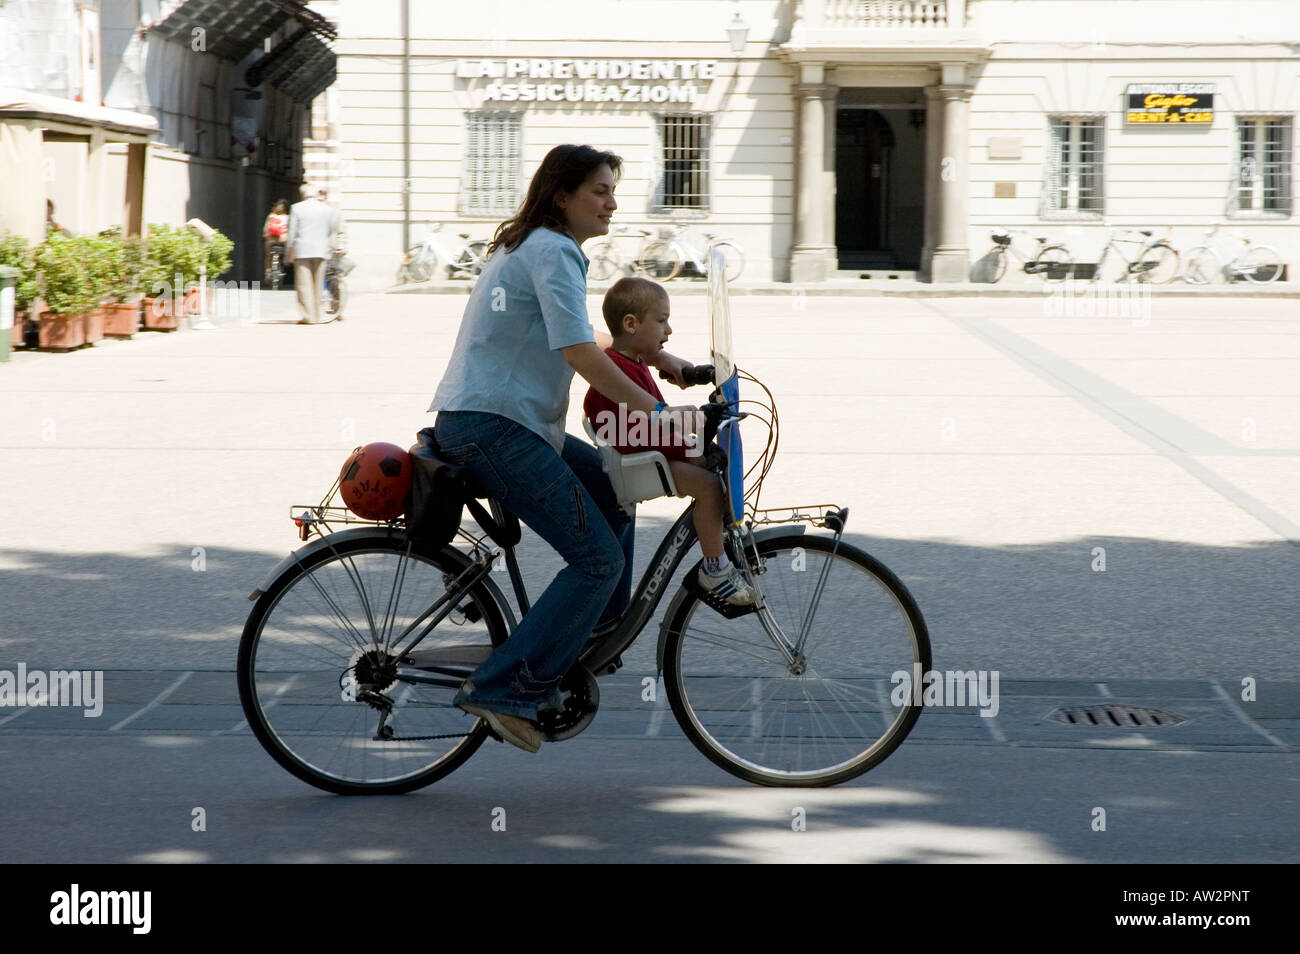 Italian woman riding bicycle with child in seat Stock Photo